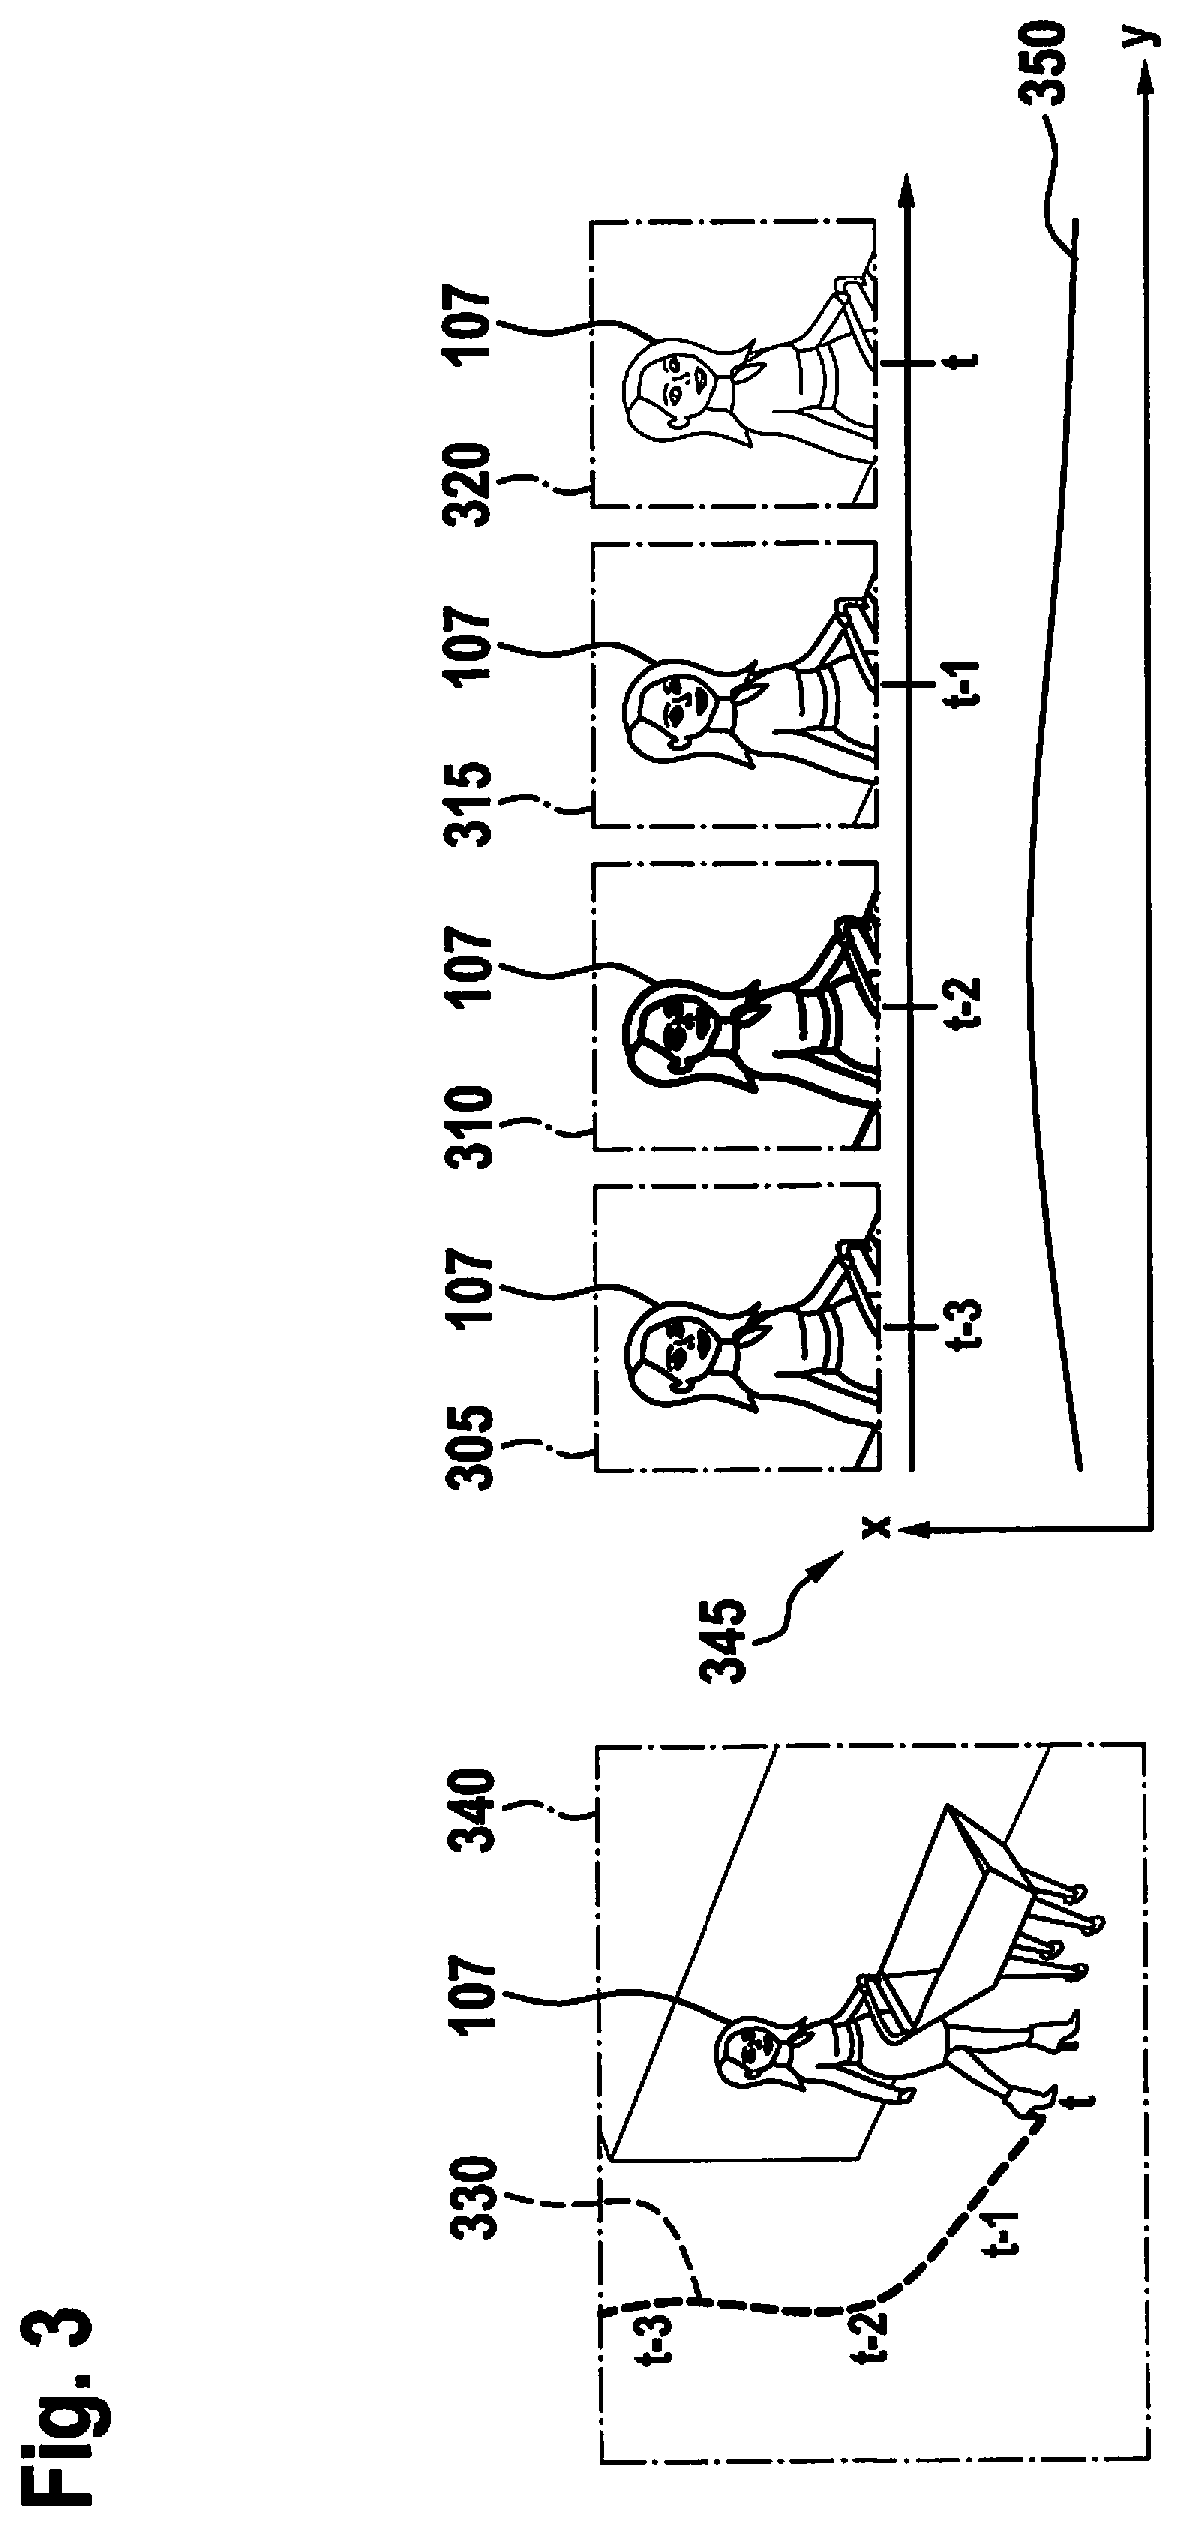 Method and device for object identification